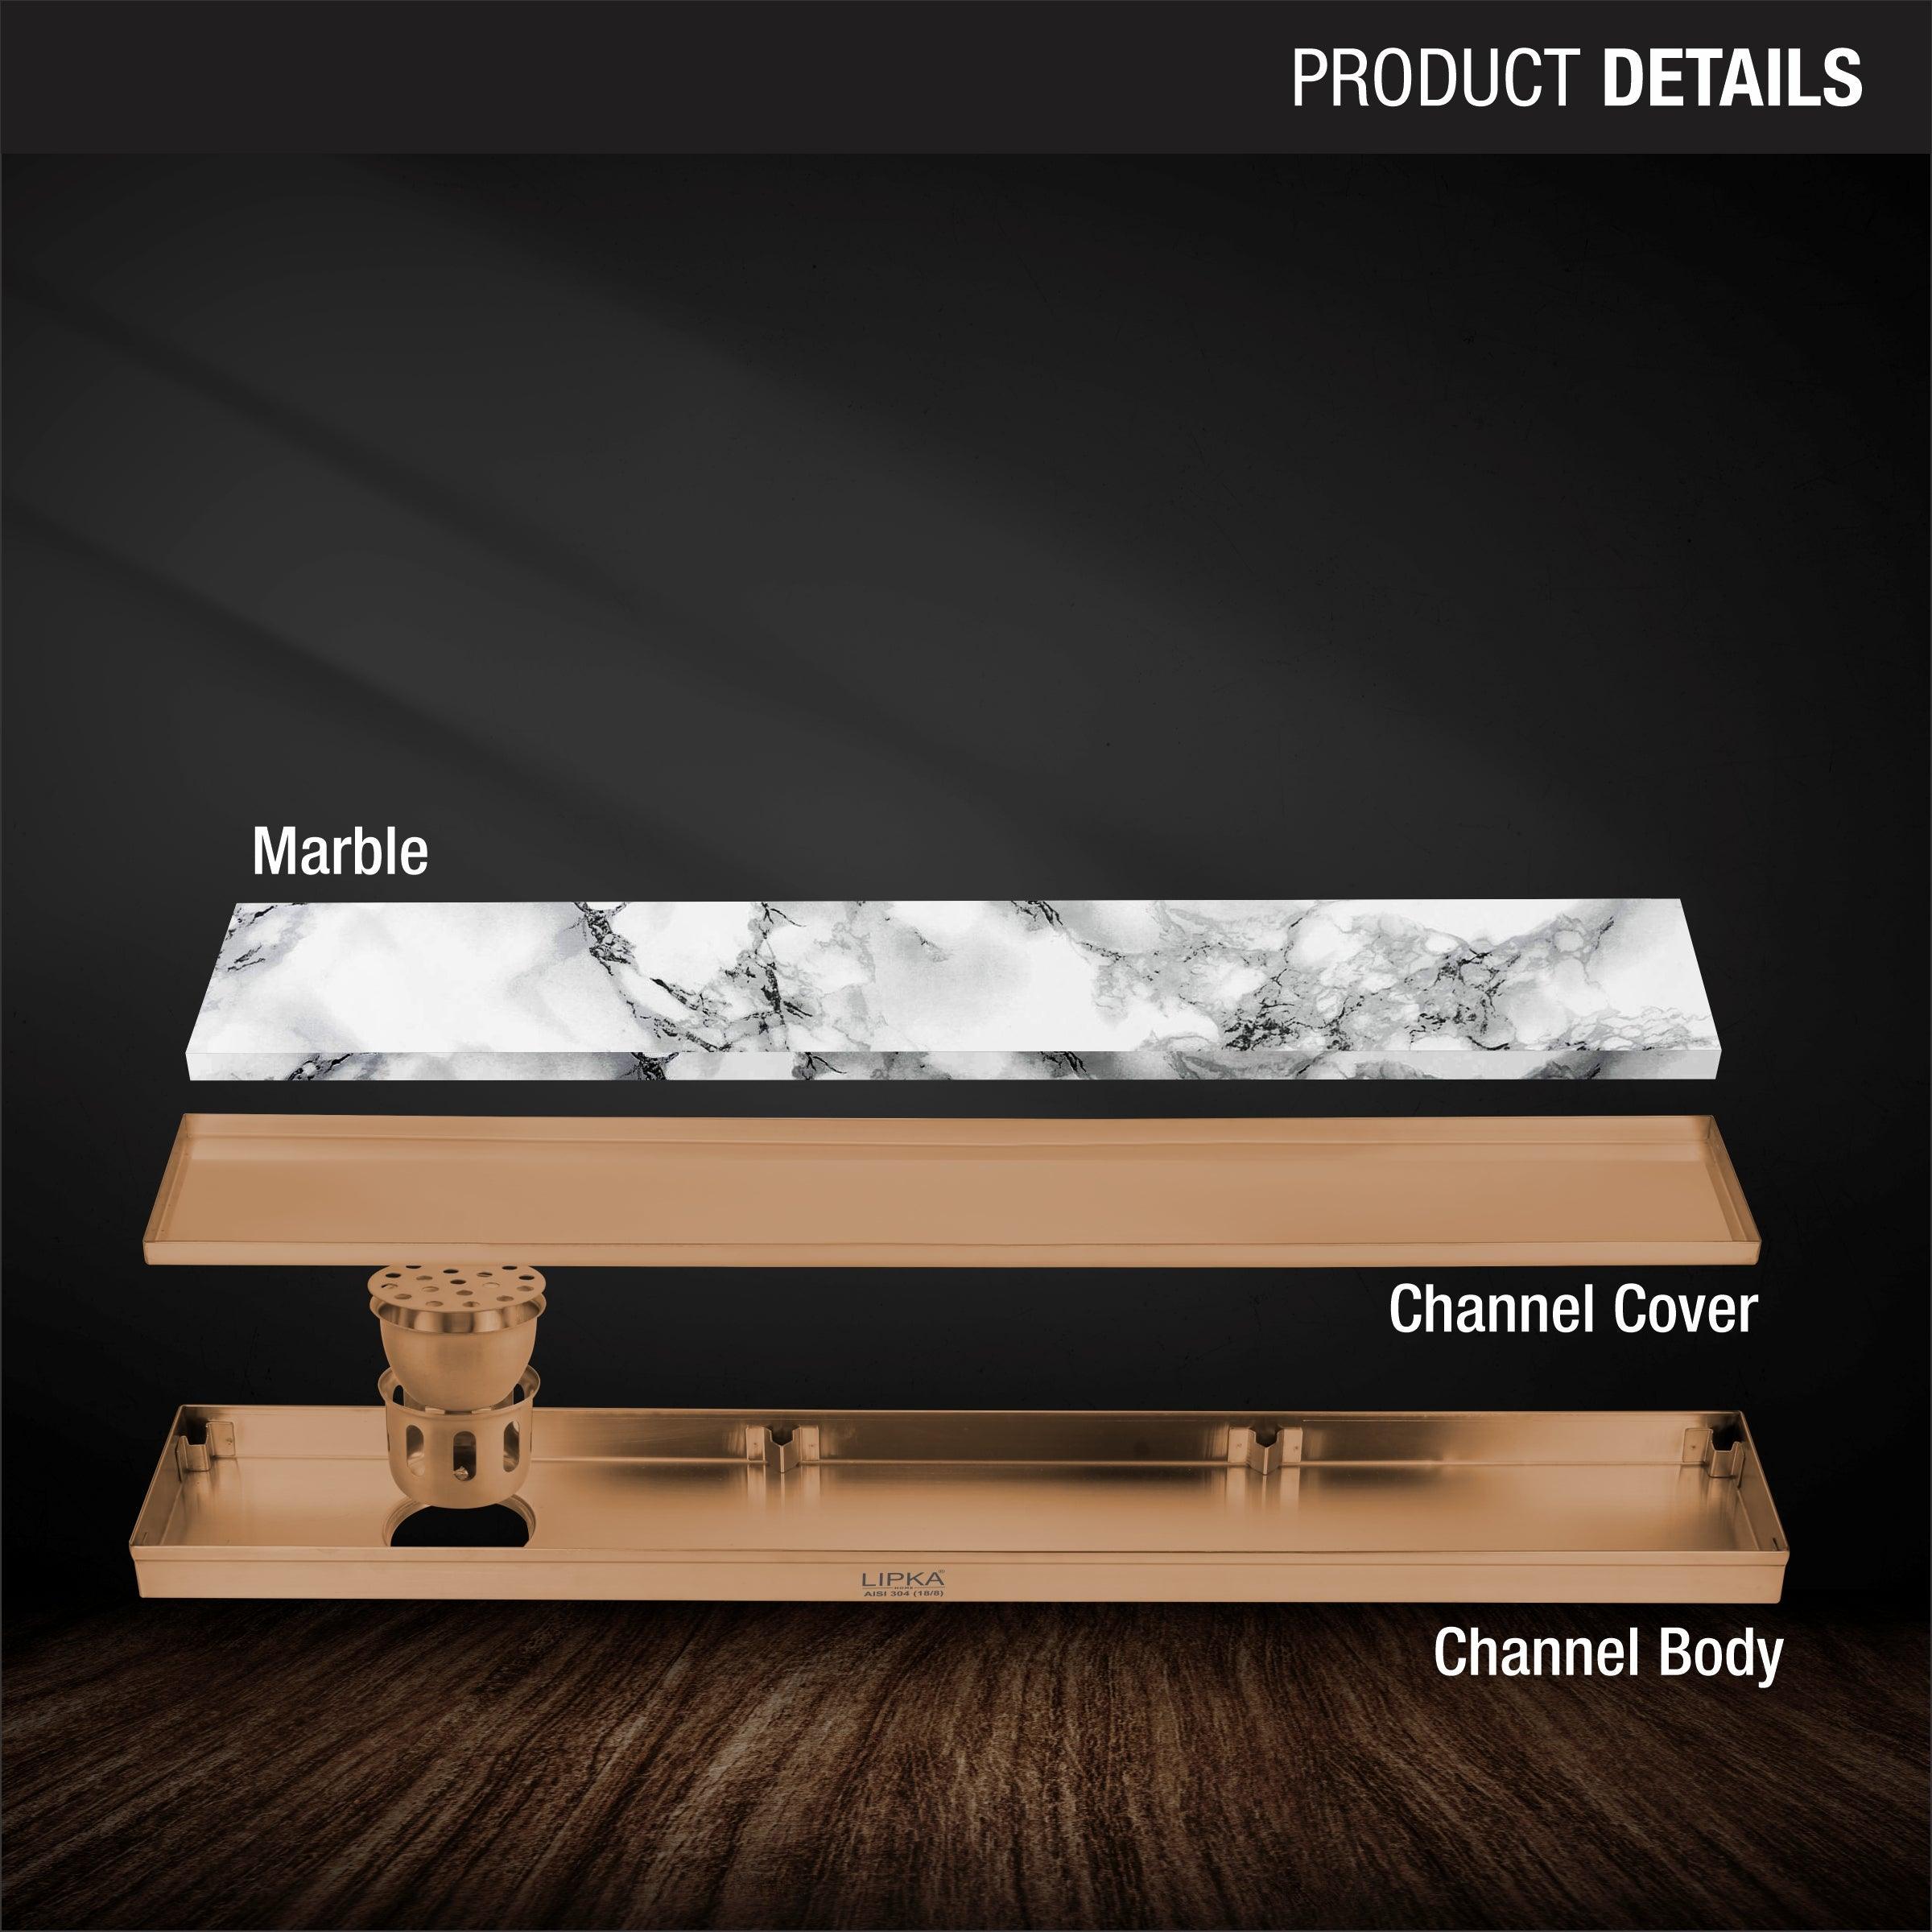 Marble Insert Shower Drain Channel - Antique Copper (40 x 5 Inches) features